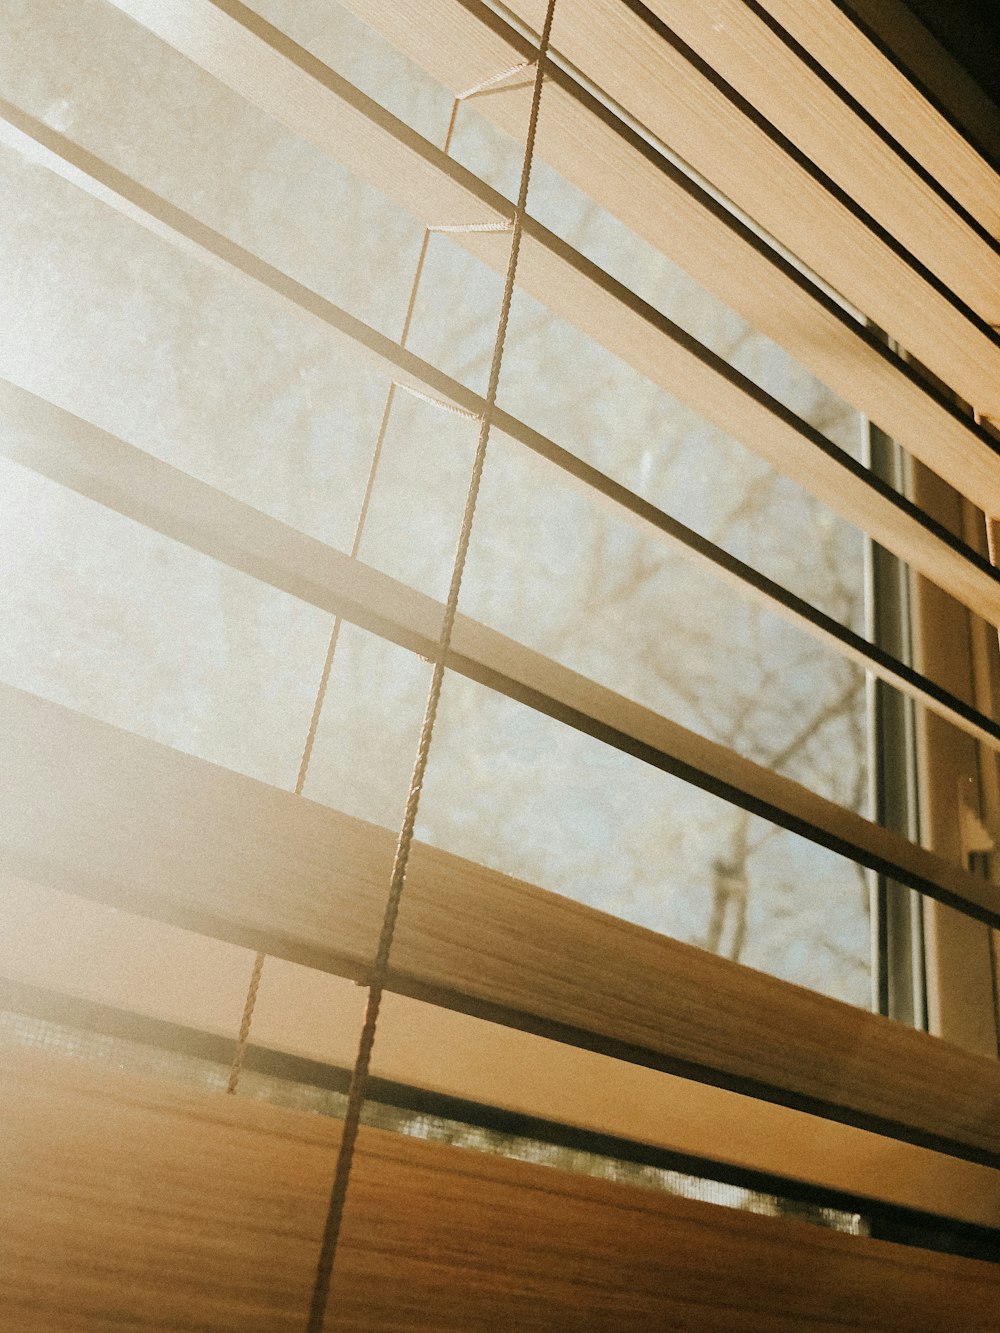 a close up of a closed window with blinds